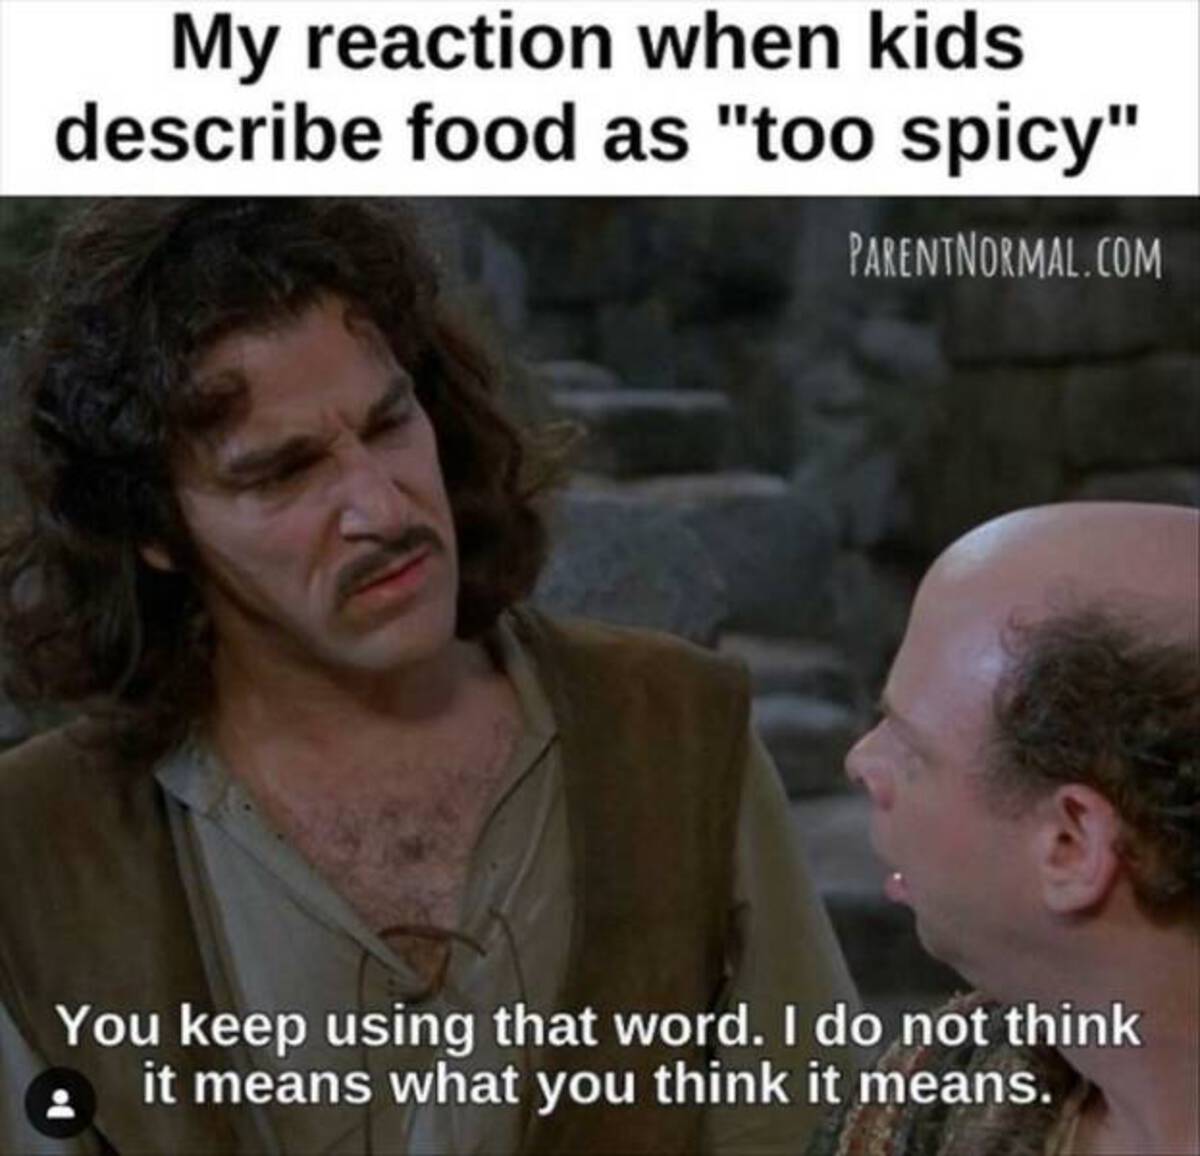 photo caption - My reaction when kids describe food as "too spicy" Parentnormal.Com You keep using that word. I do not think it means what you think it means.